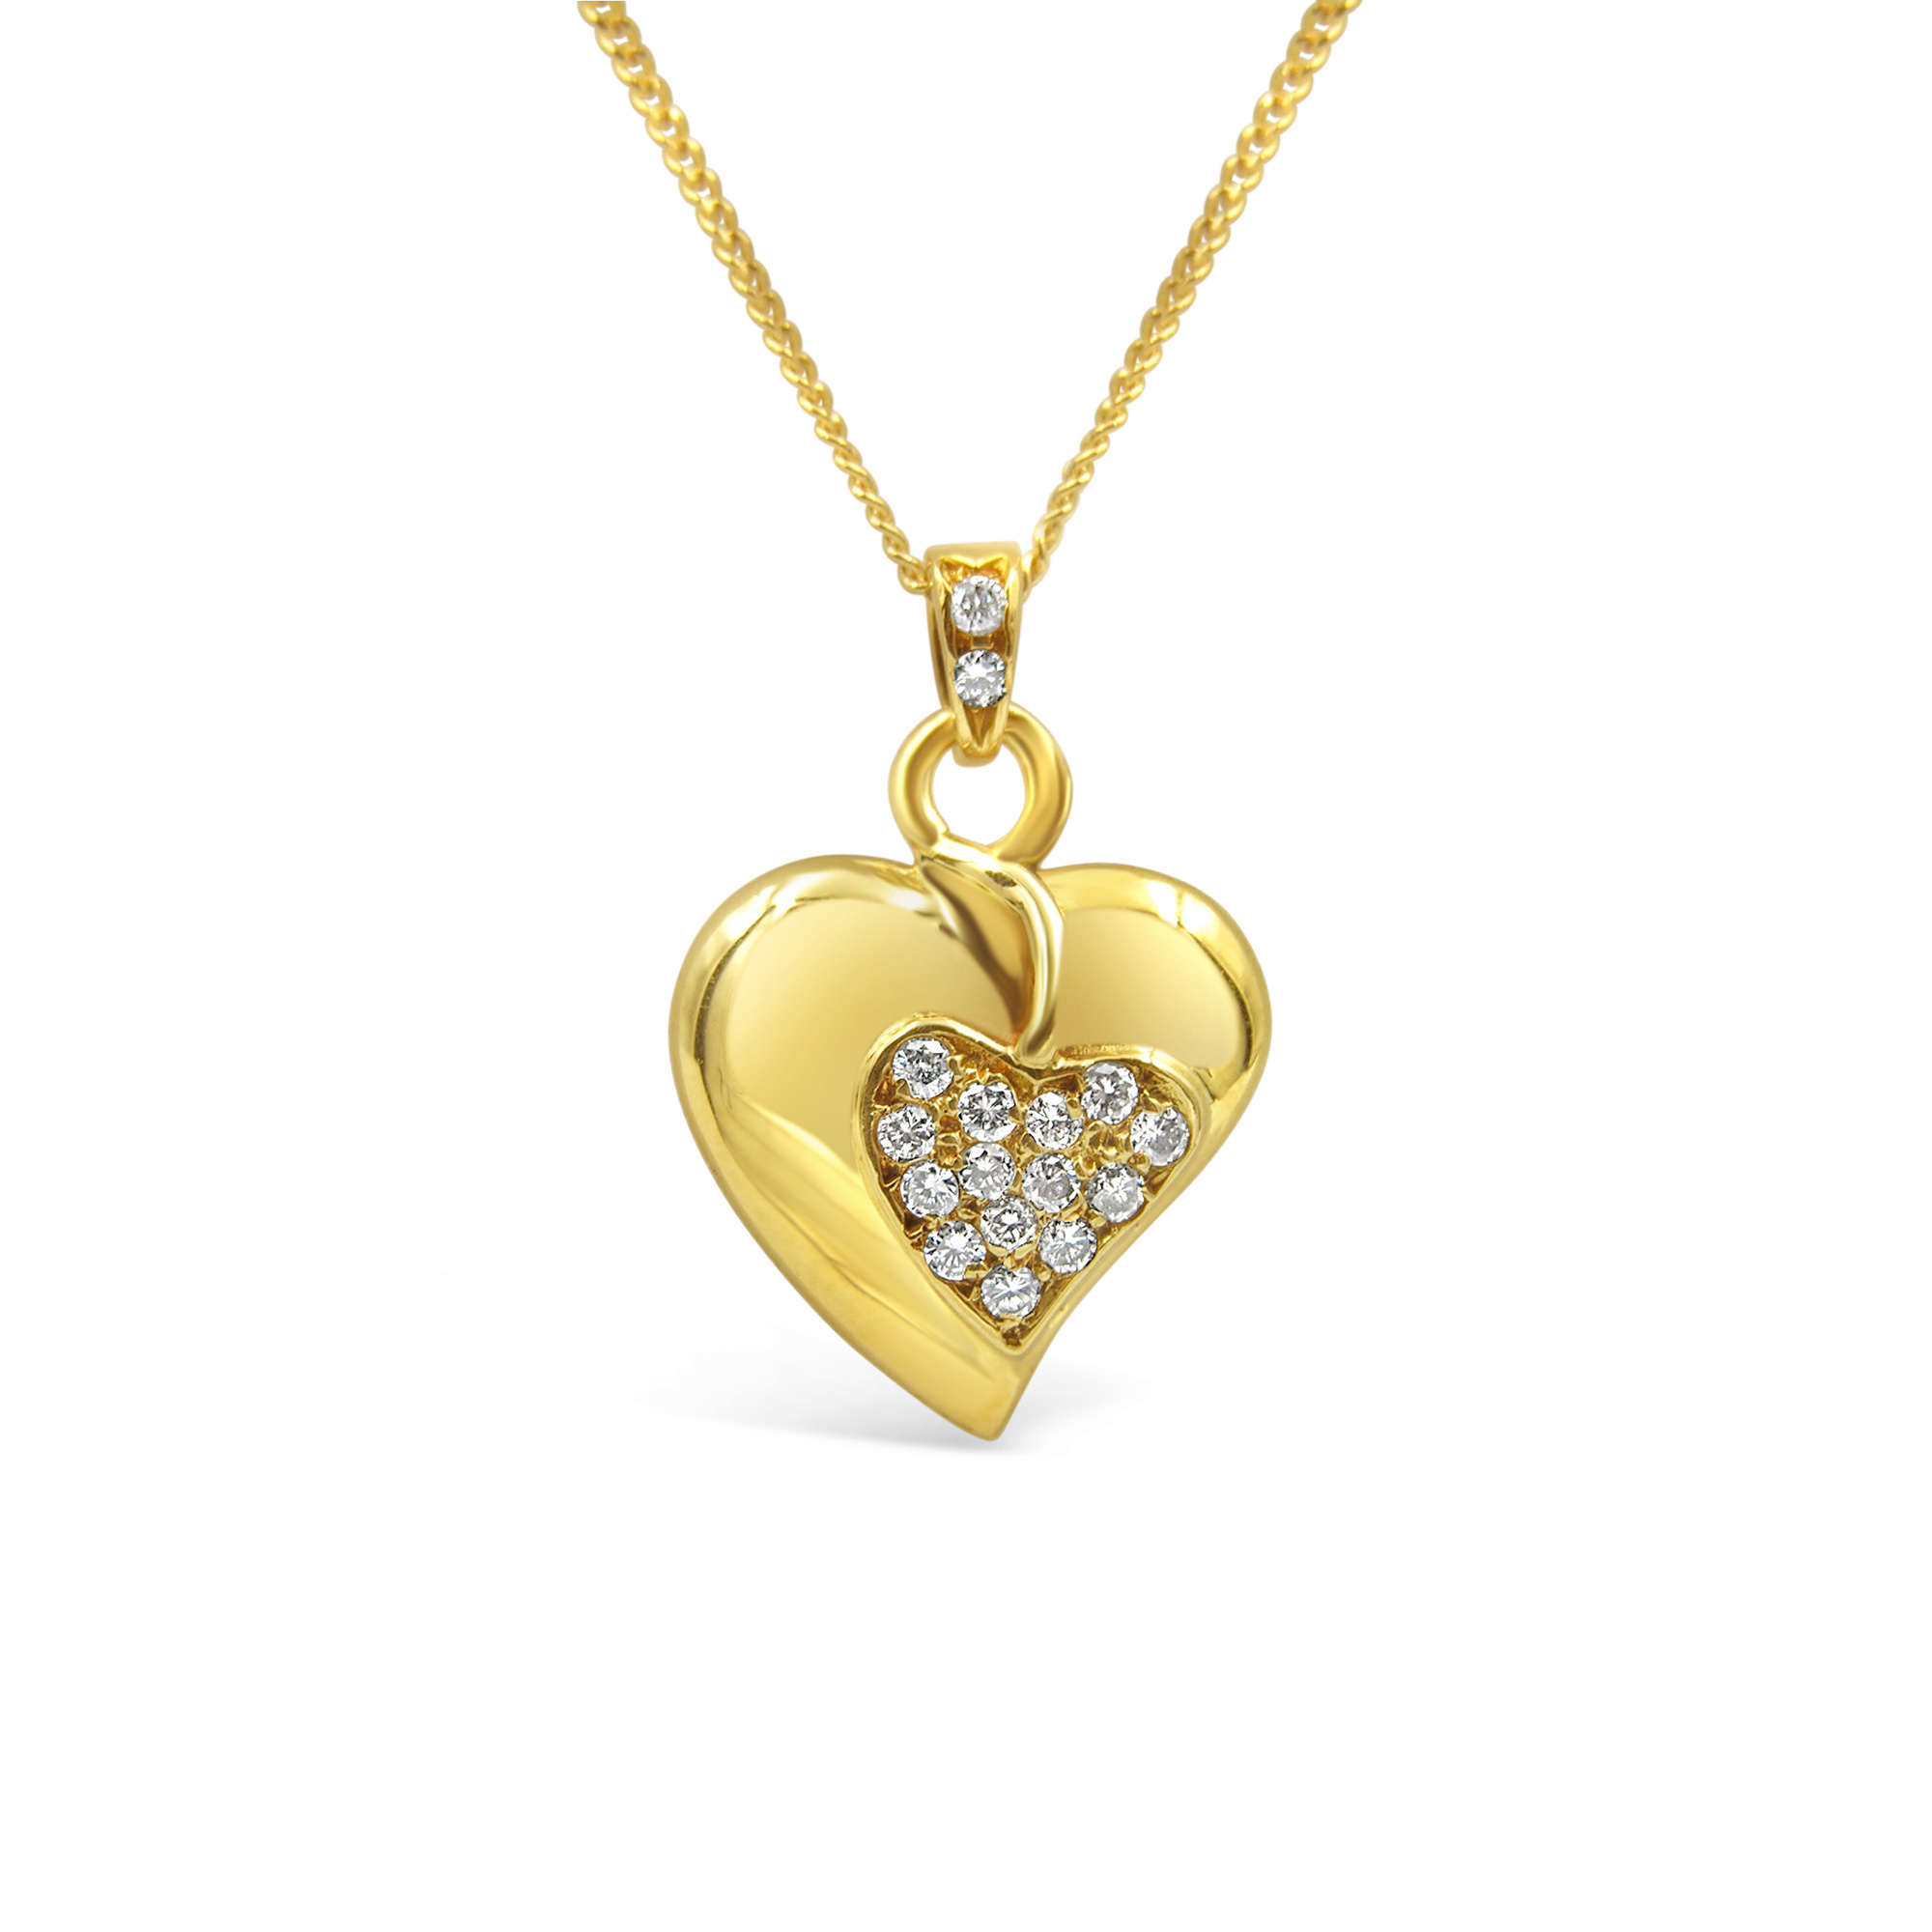 18kt yellow gold heart pendant with 0.30 ct diamonds